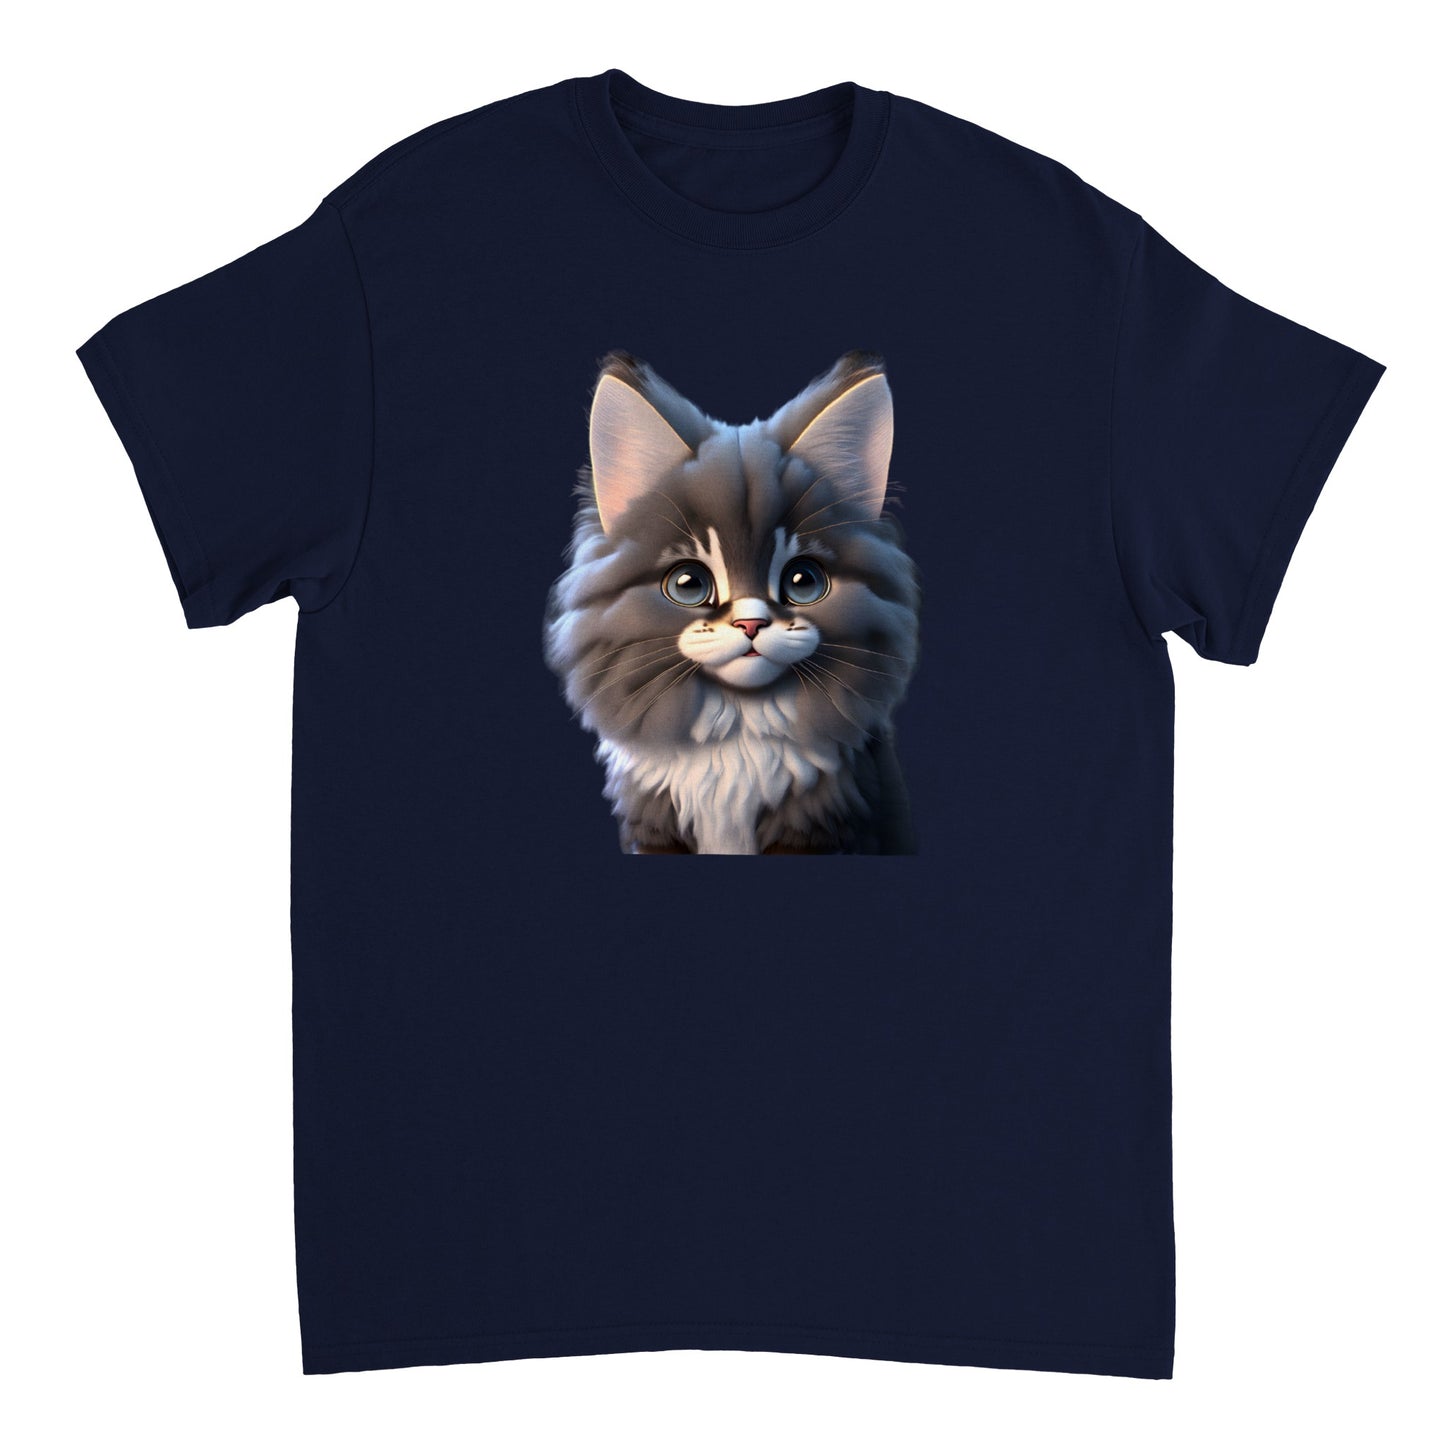 Adorable, Cool, Cute Cats and Kittens Toy - Heavyweight Unisex Crewneck T-shirt 9